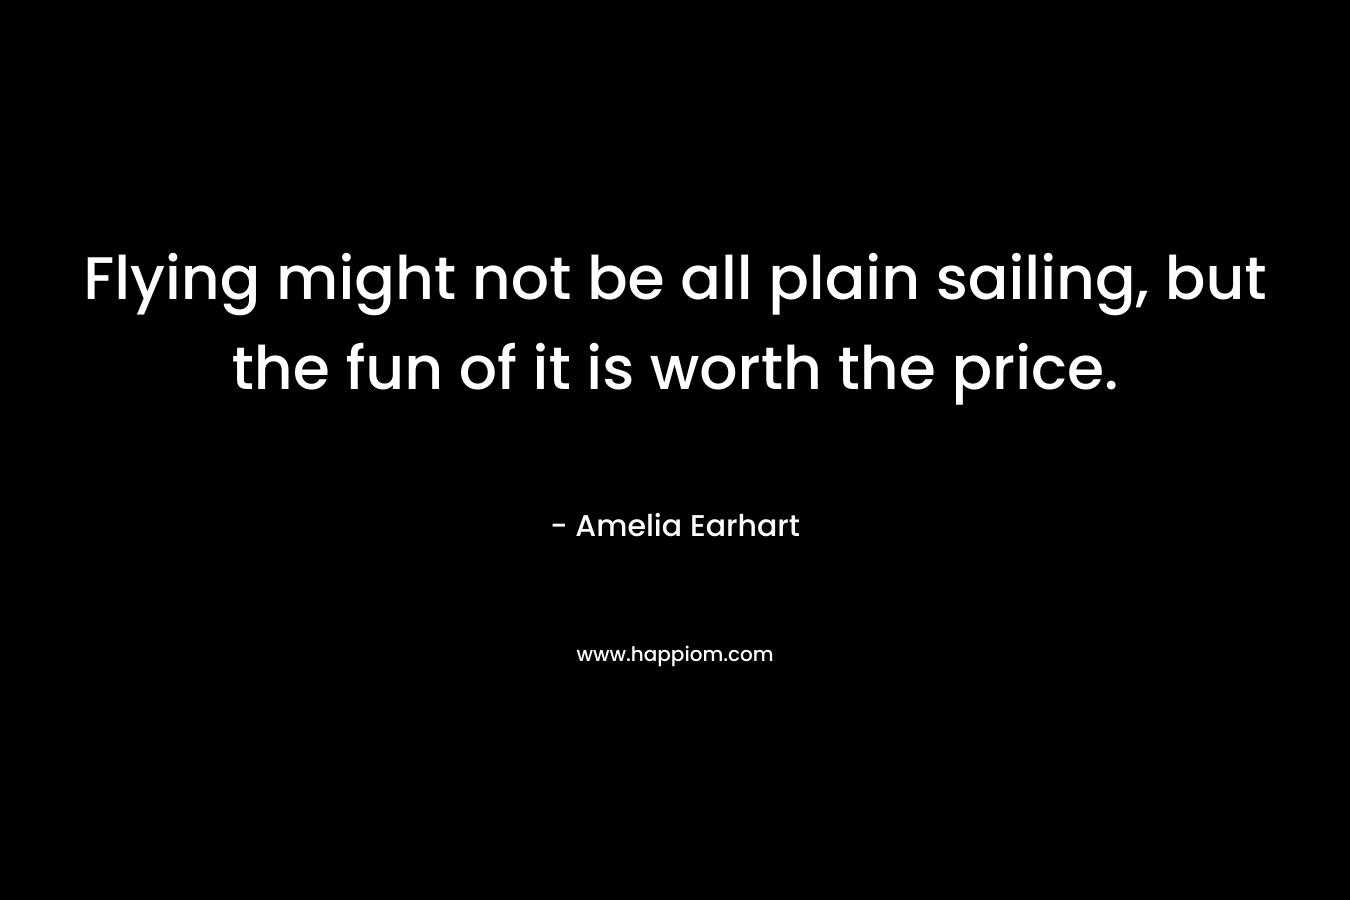 Flying might not be all plain sailing, but the fun of it is worth the price. – Amelia Earhart